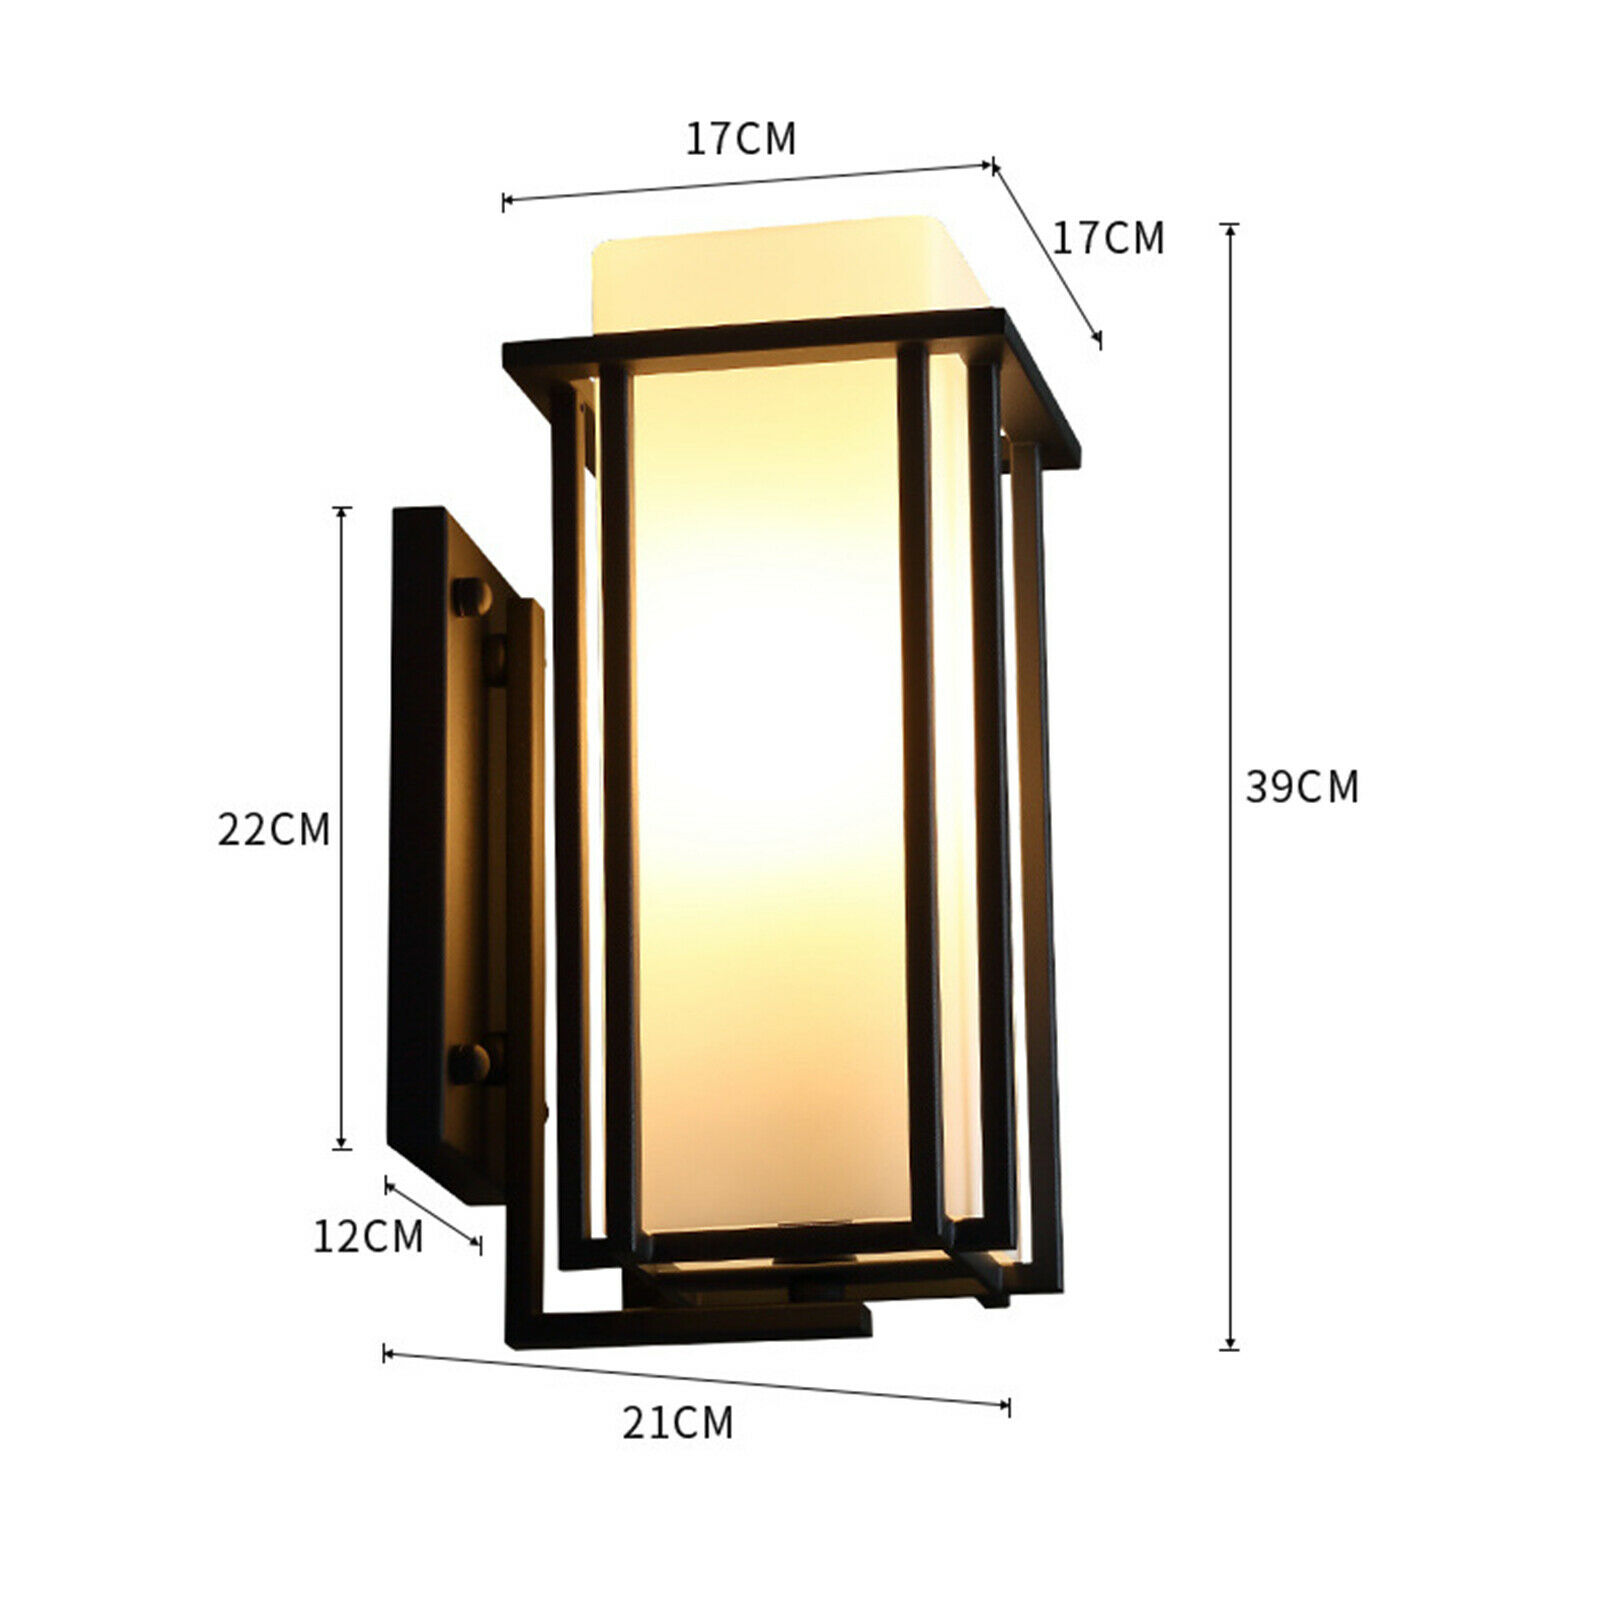 Outdoor Modern Light Wall Sconce Fixture Exterior Porch Waterproof Black LED Wall Light Waterproof Exterior Outdoor Porch Sconce Lamp Fixture Exterior Outdoor Wall Lantern Lighting Garden Wall Lamp - image 2 of 3